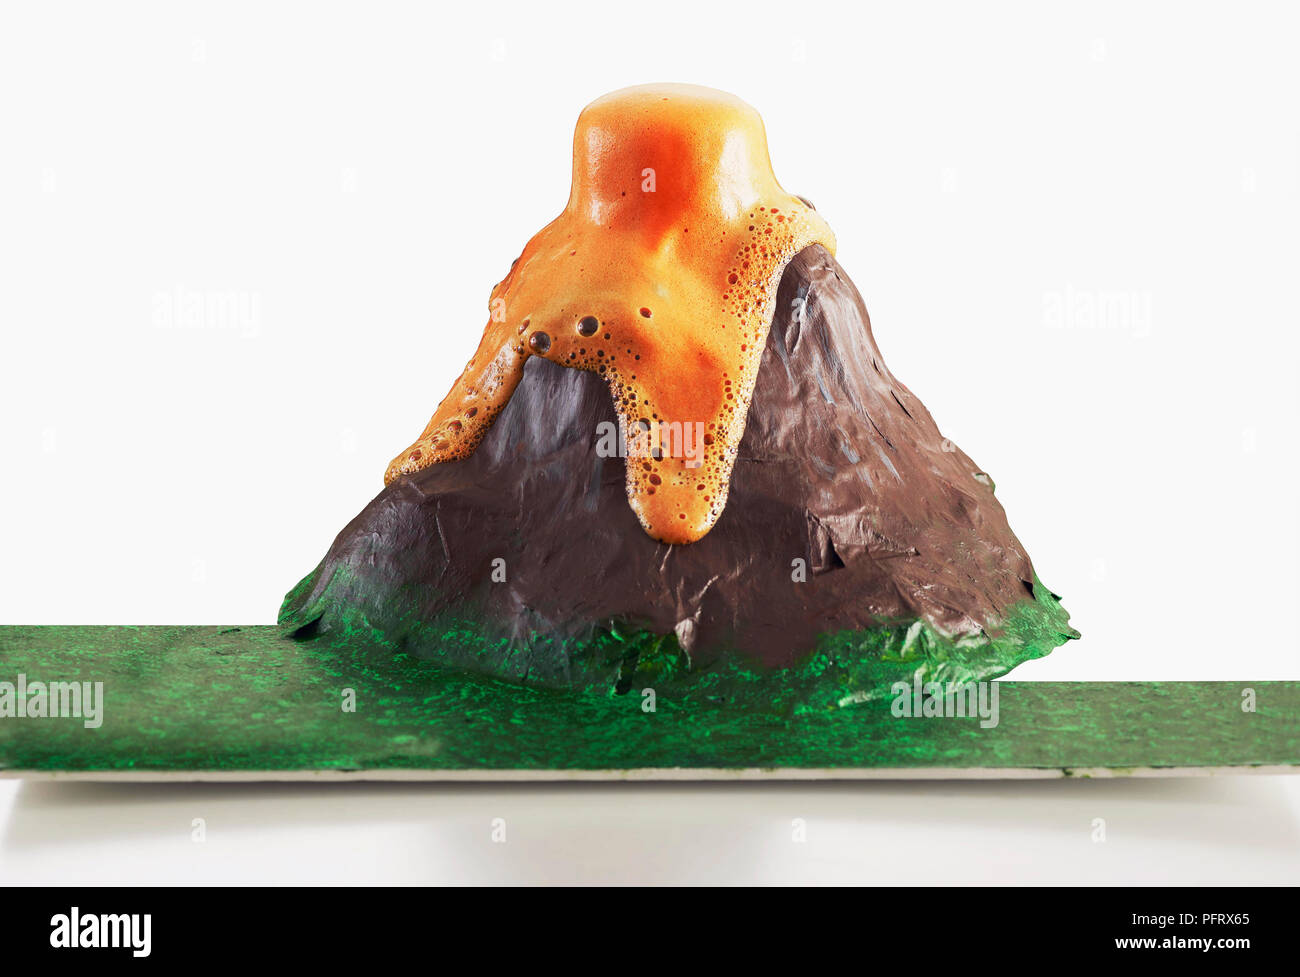 Step by step science experiments, erupting volcano. Stock Photo